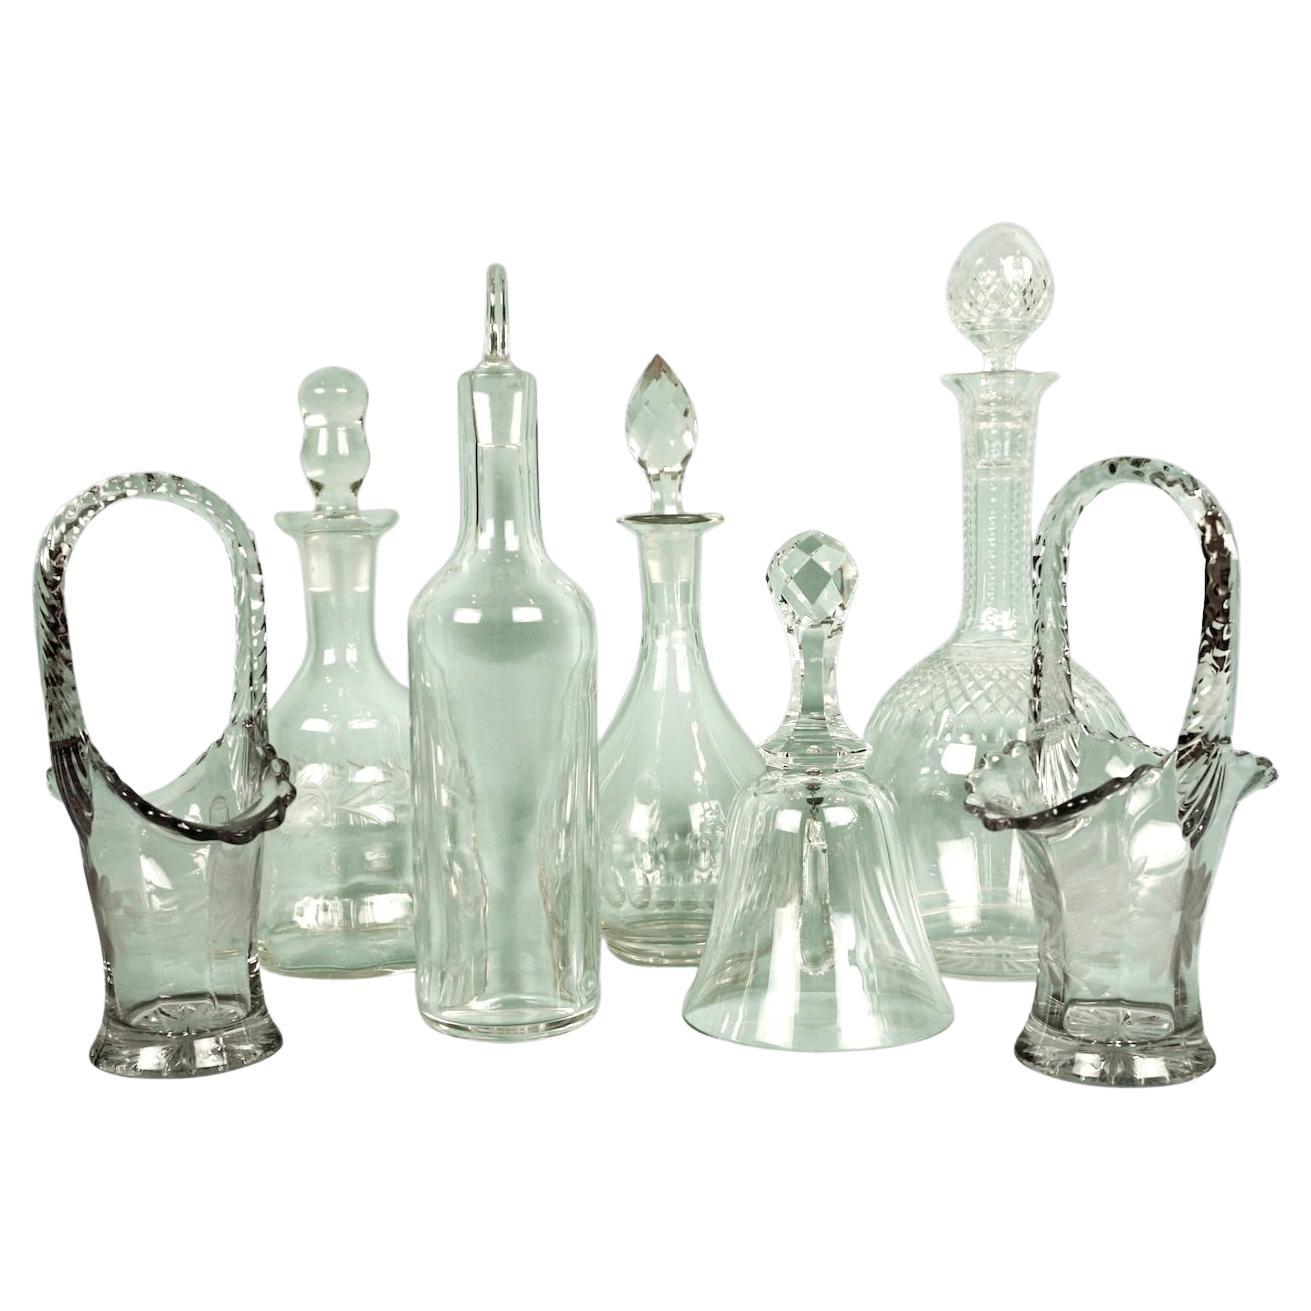 Collection of Vintage Glass Objects, Dinner Bell, Decanters and Candy Dishes